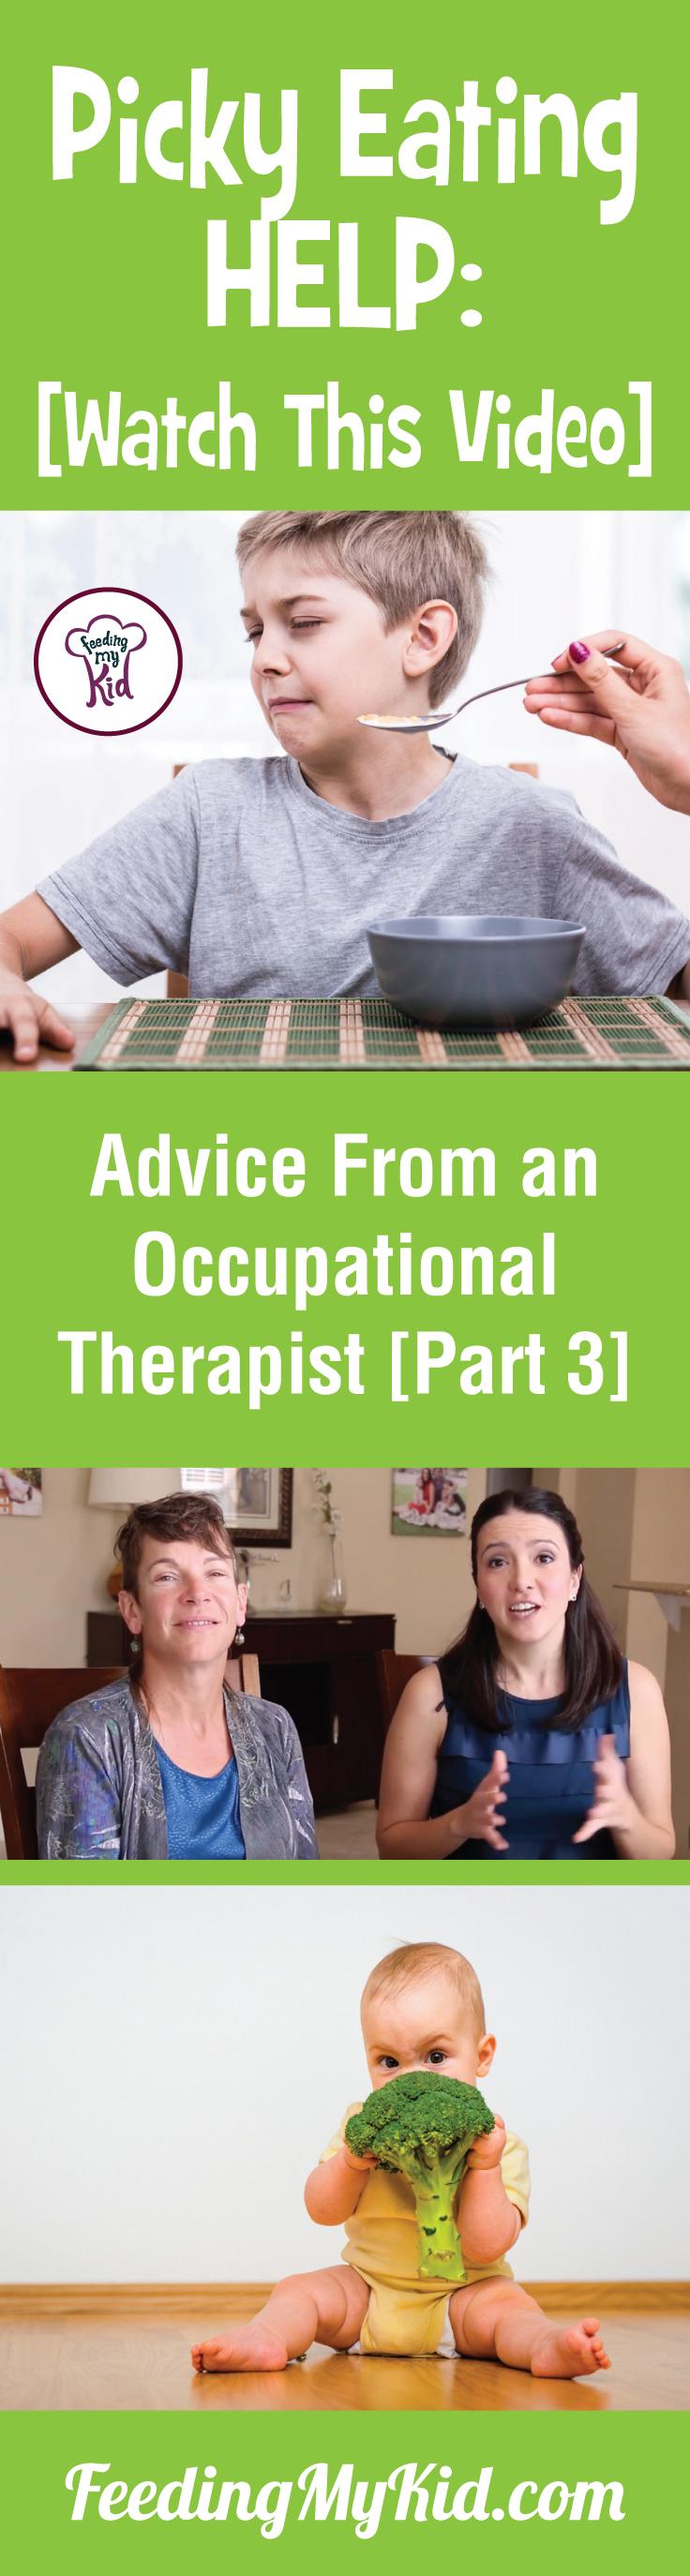 Picky Eating Help: Advice from an Occupational Therapist [Part 3]